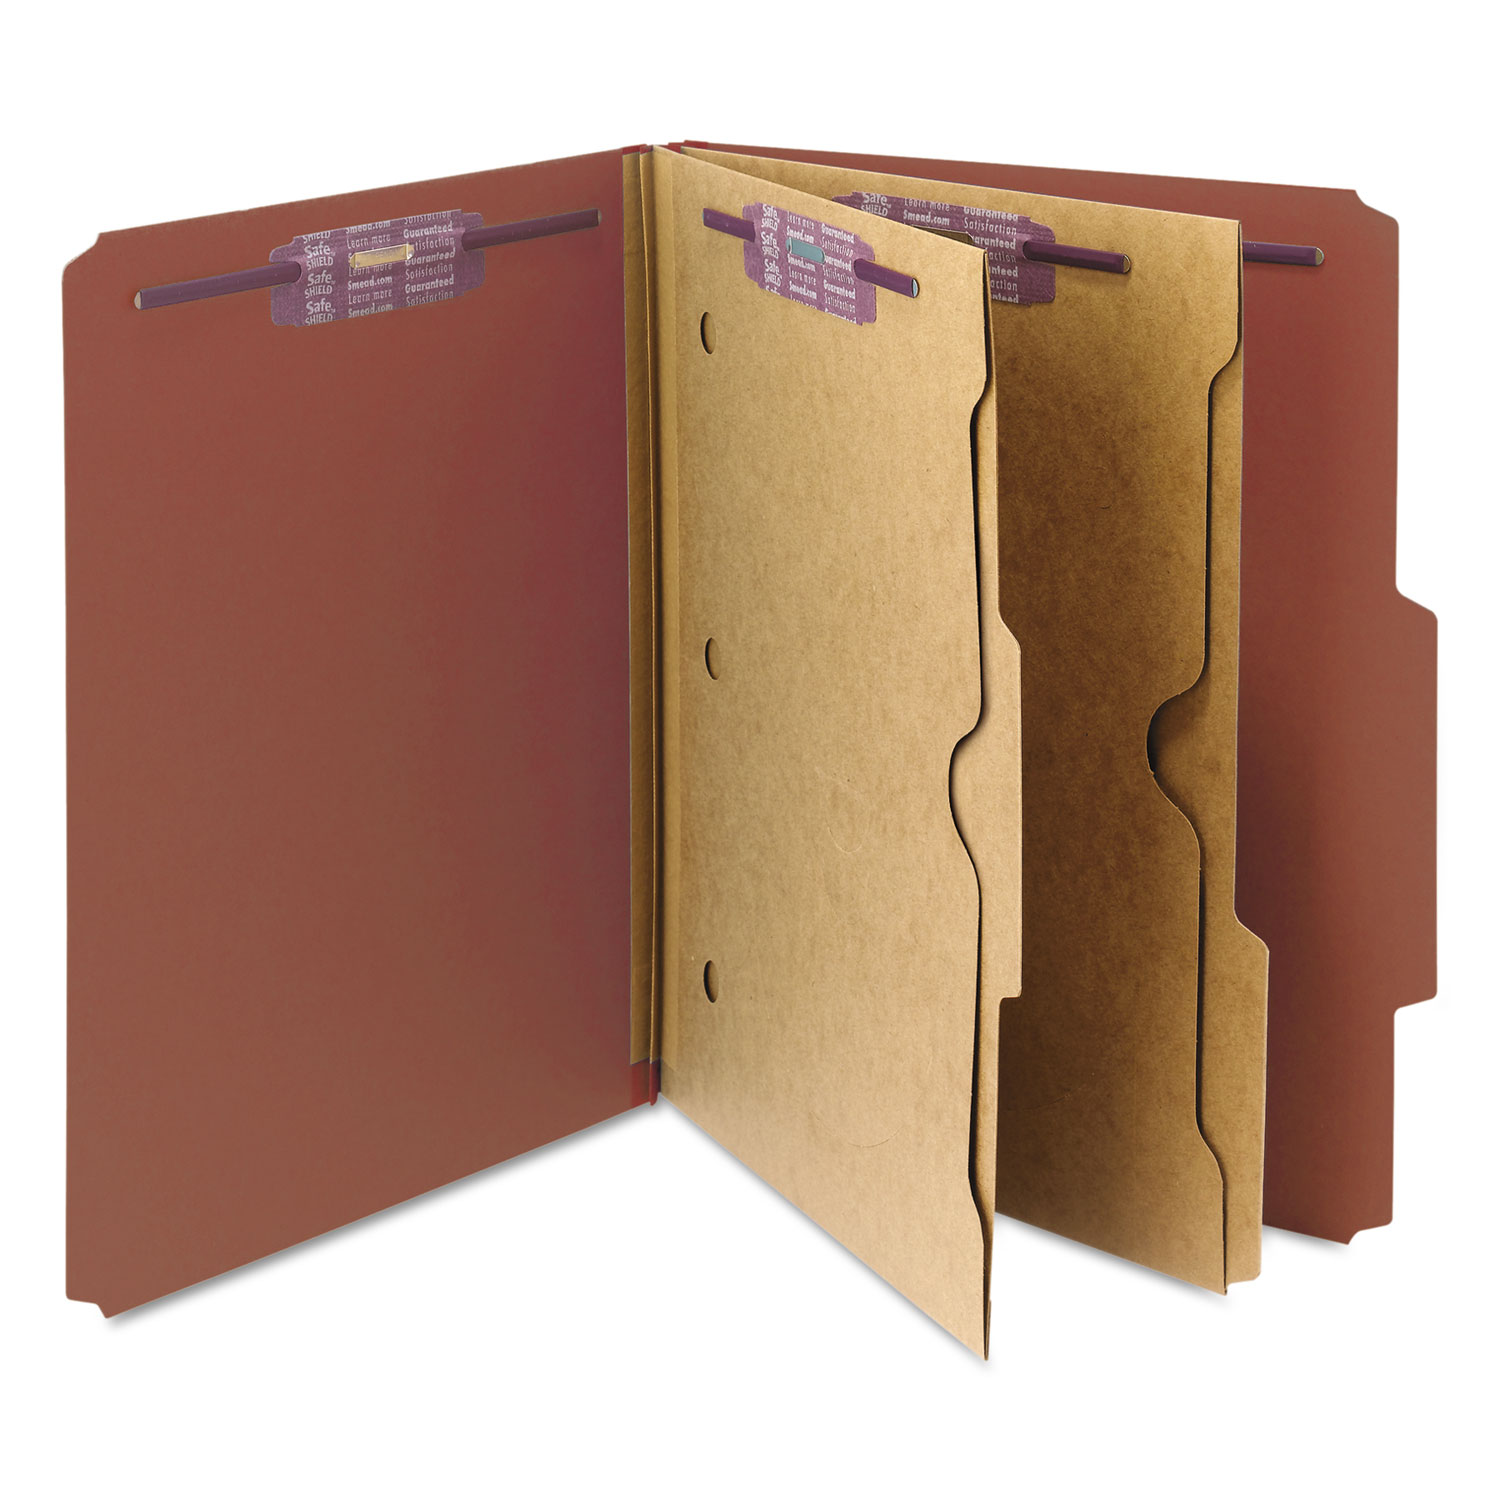 Pressboard Folders with Two Pocket Dividers, Letter, Six-Section, Red, 10/Box